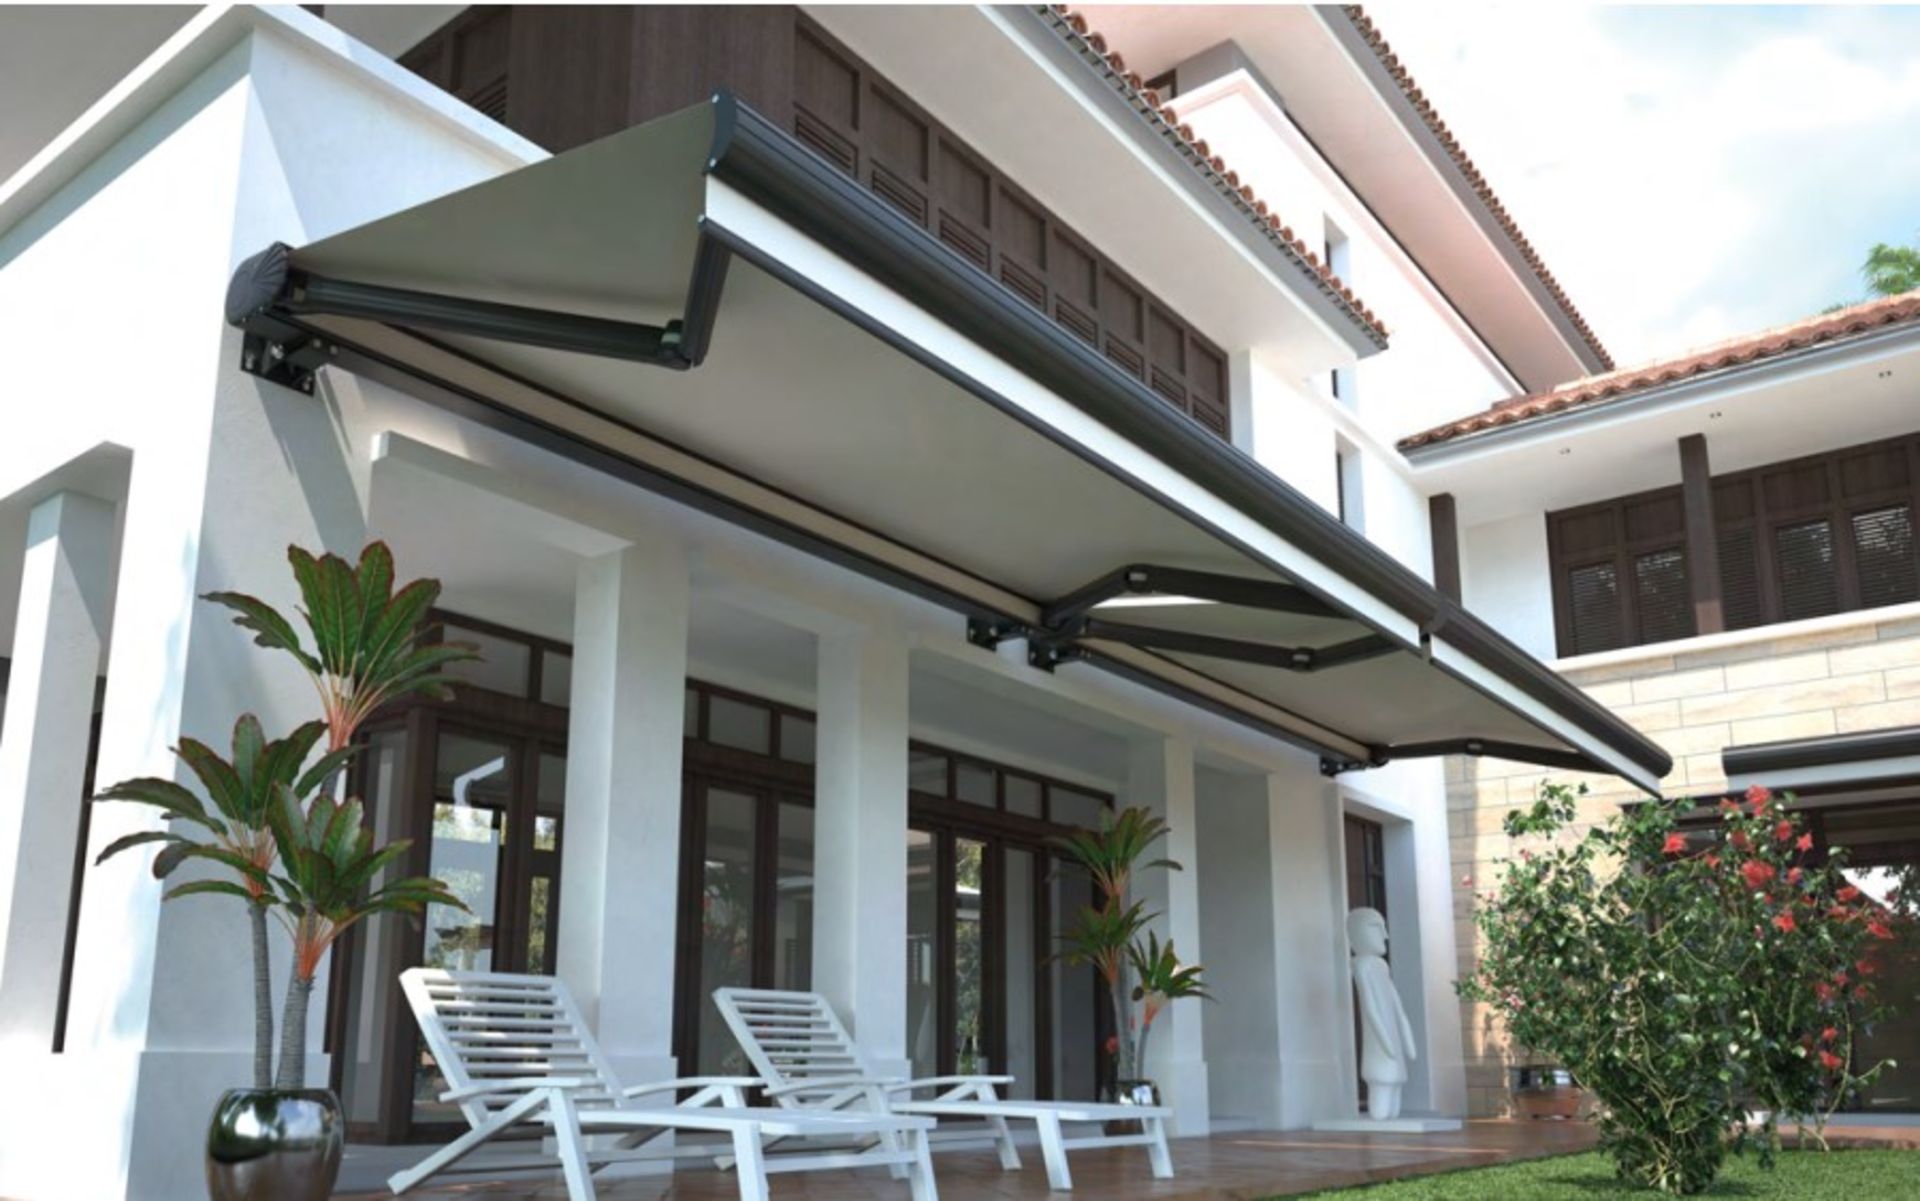 New Orion? fully electric Cassette Awning with remote control | 6m width and 3.5 mtr projection,